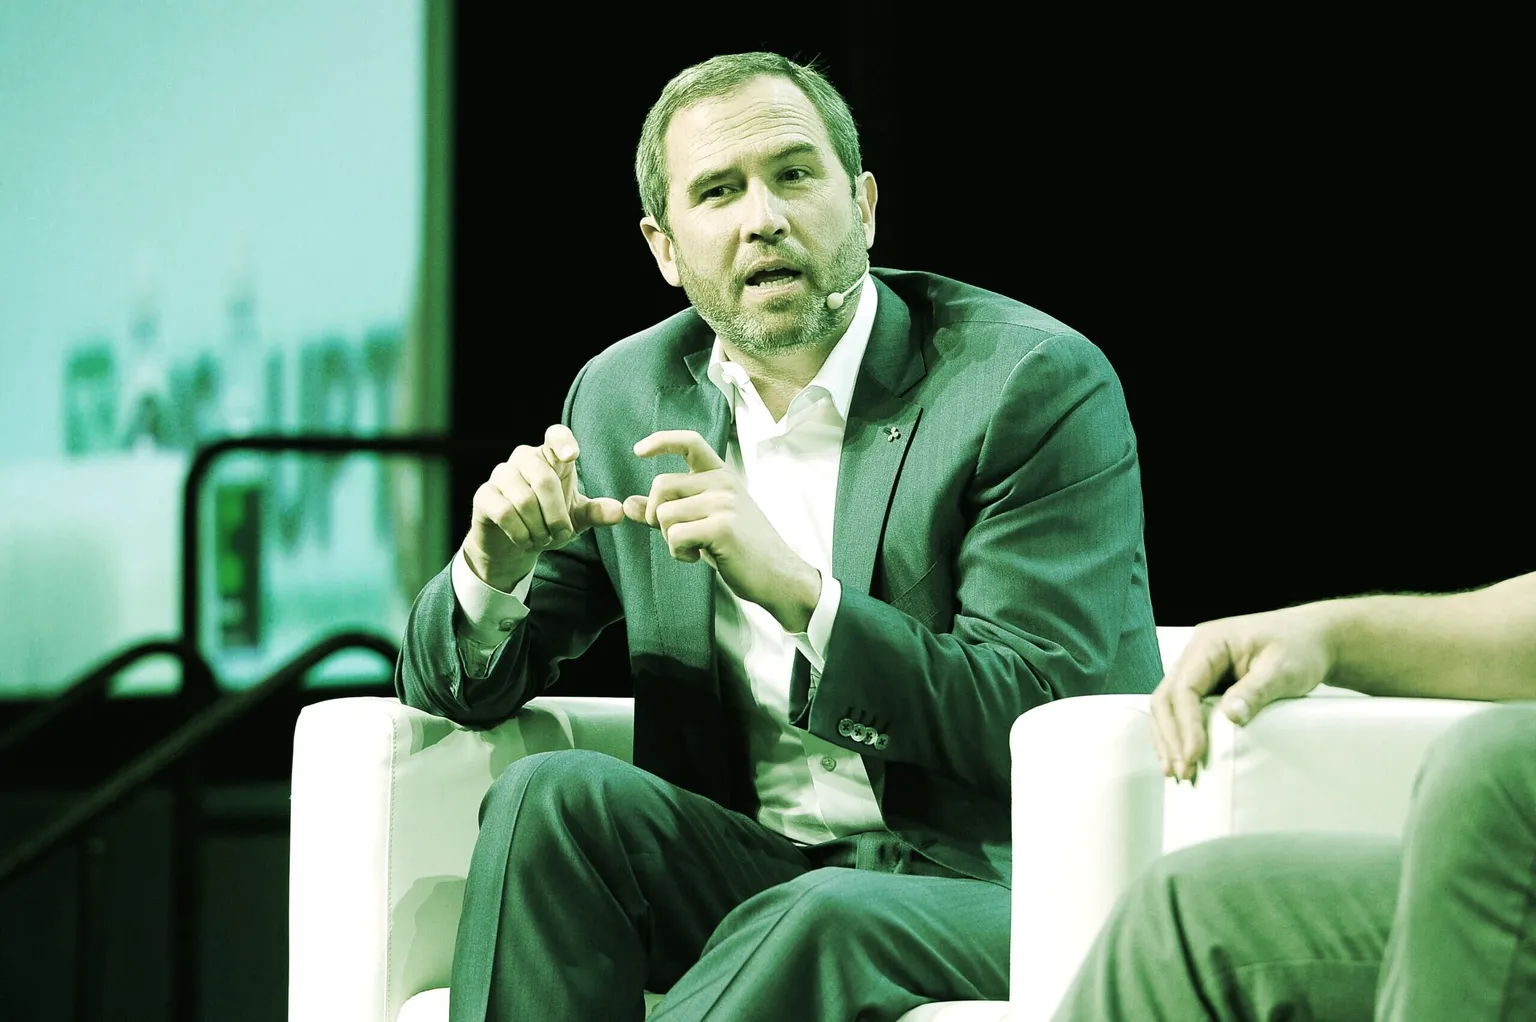 Ripple CEO Brad Garlinghouse speaks at TechCrunch Disrupt SF on September 5, 2018 in San Francisco. Image: Steve Jennings/Getty Images for TechCrunch (CC BY 2.0)